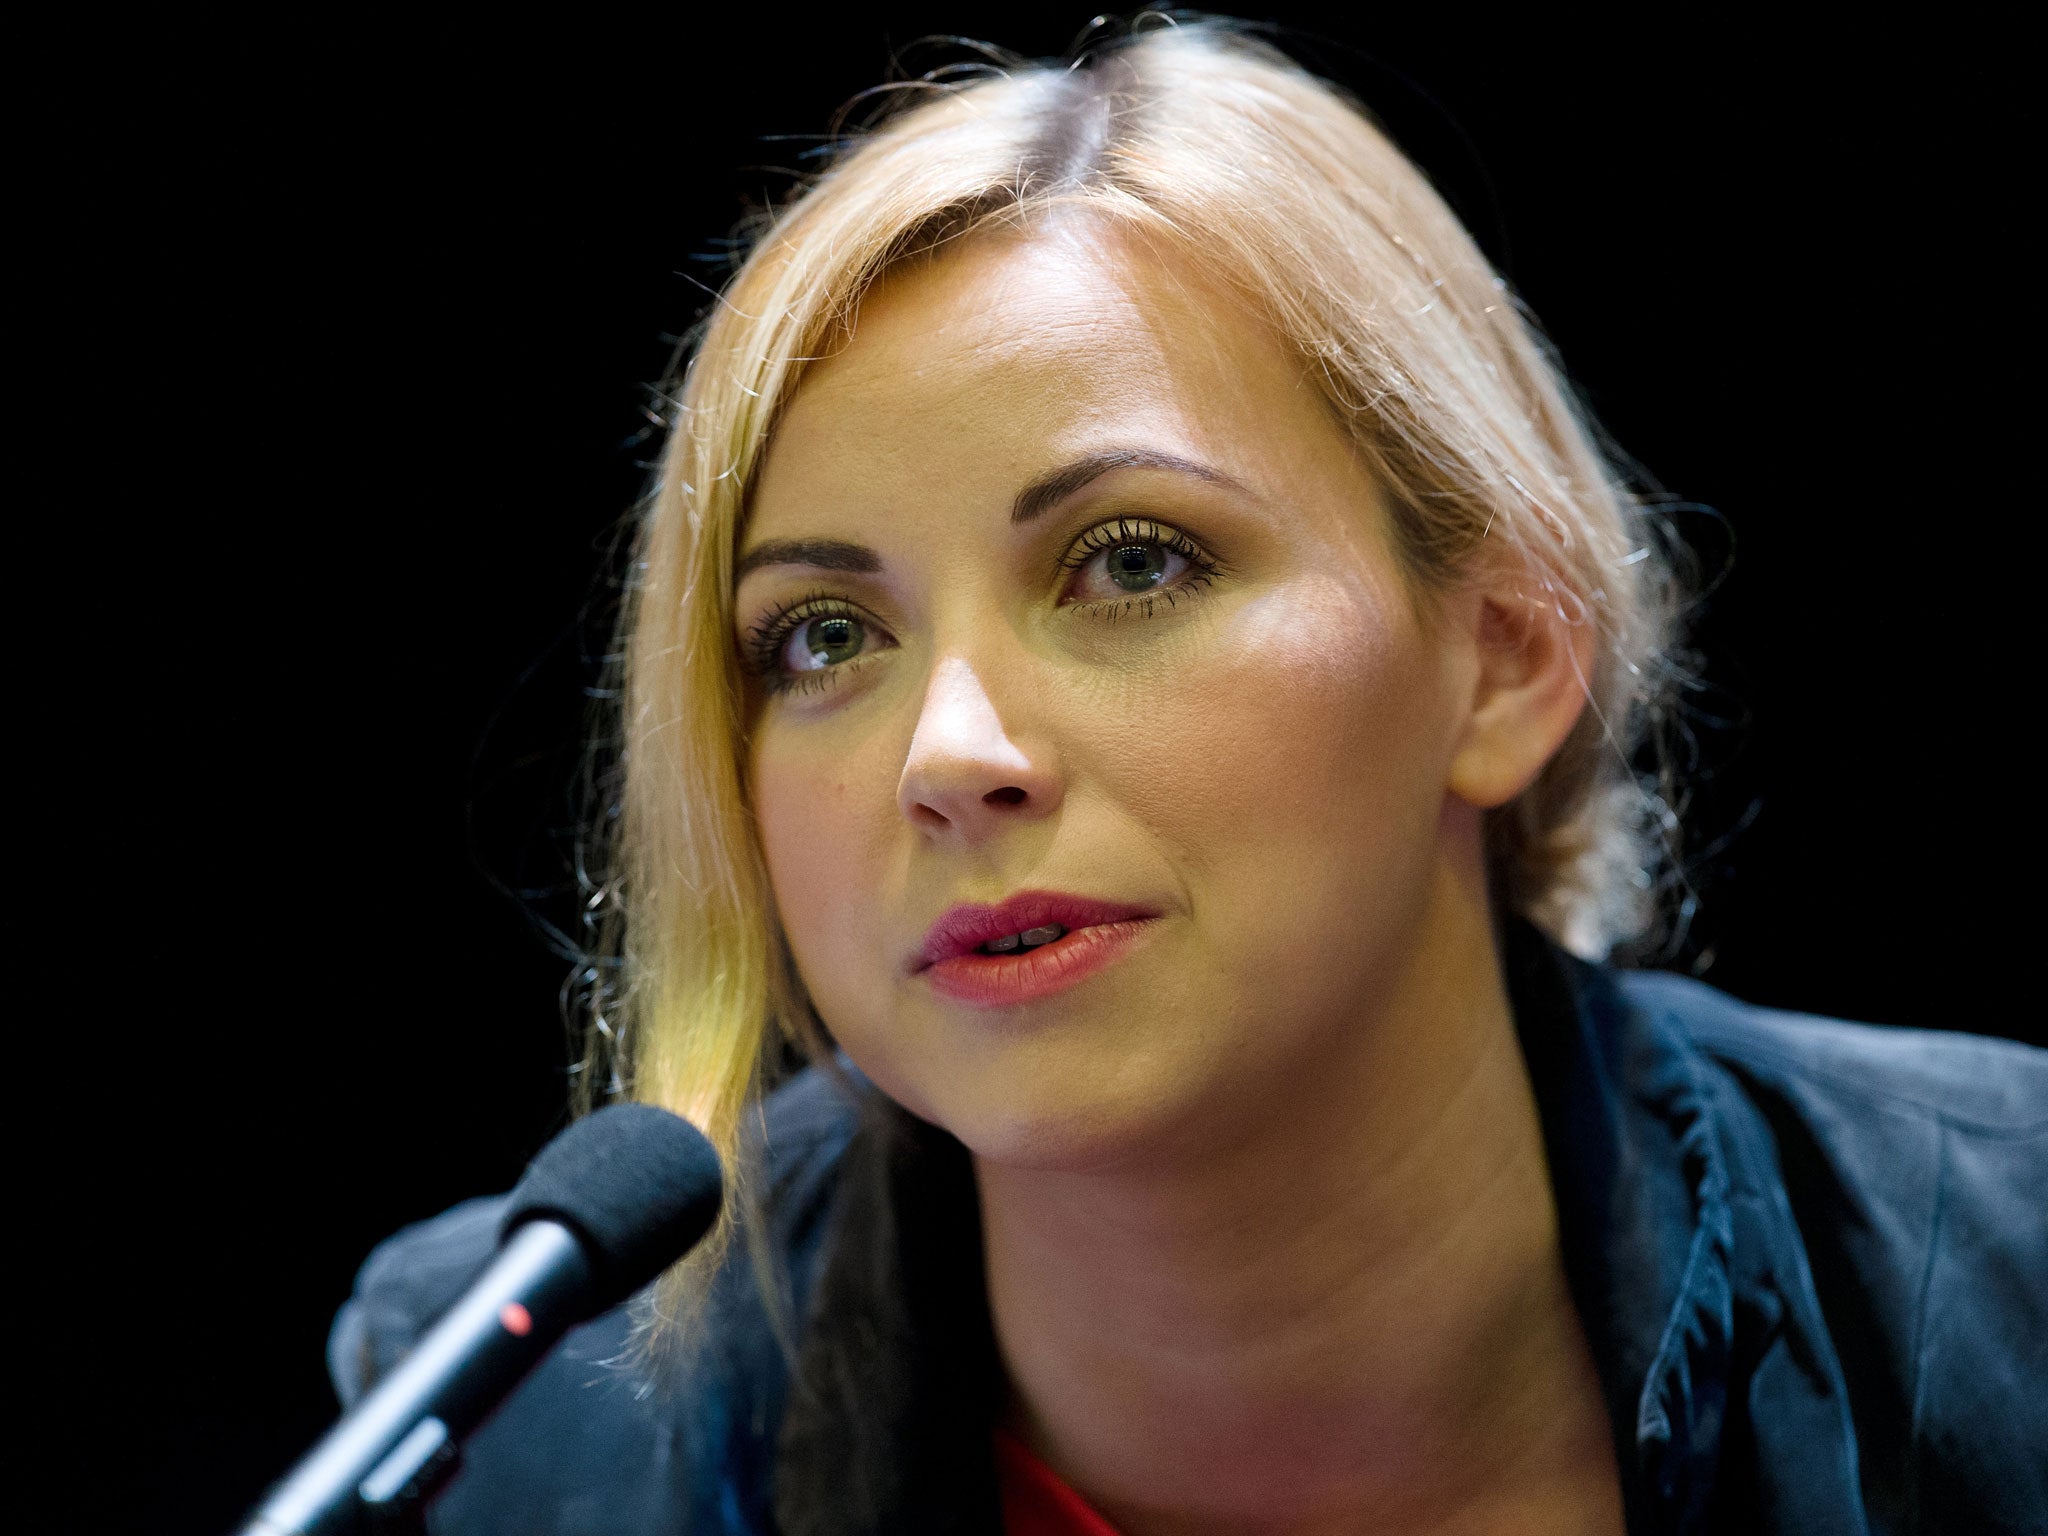 Charlotte Church has launched a scathing attack on the music industry